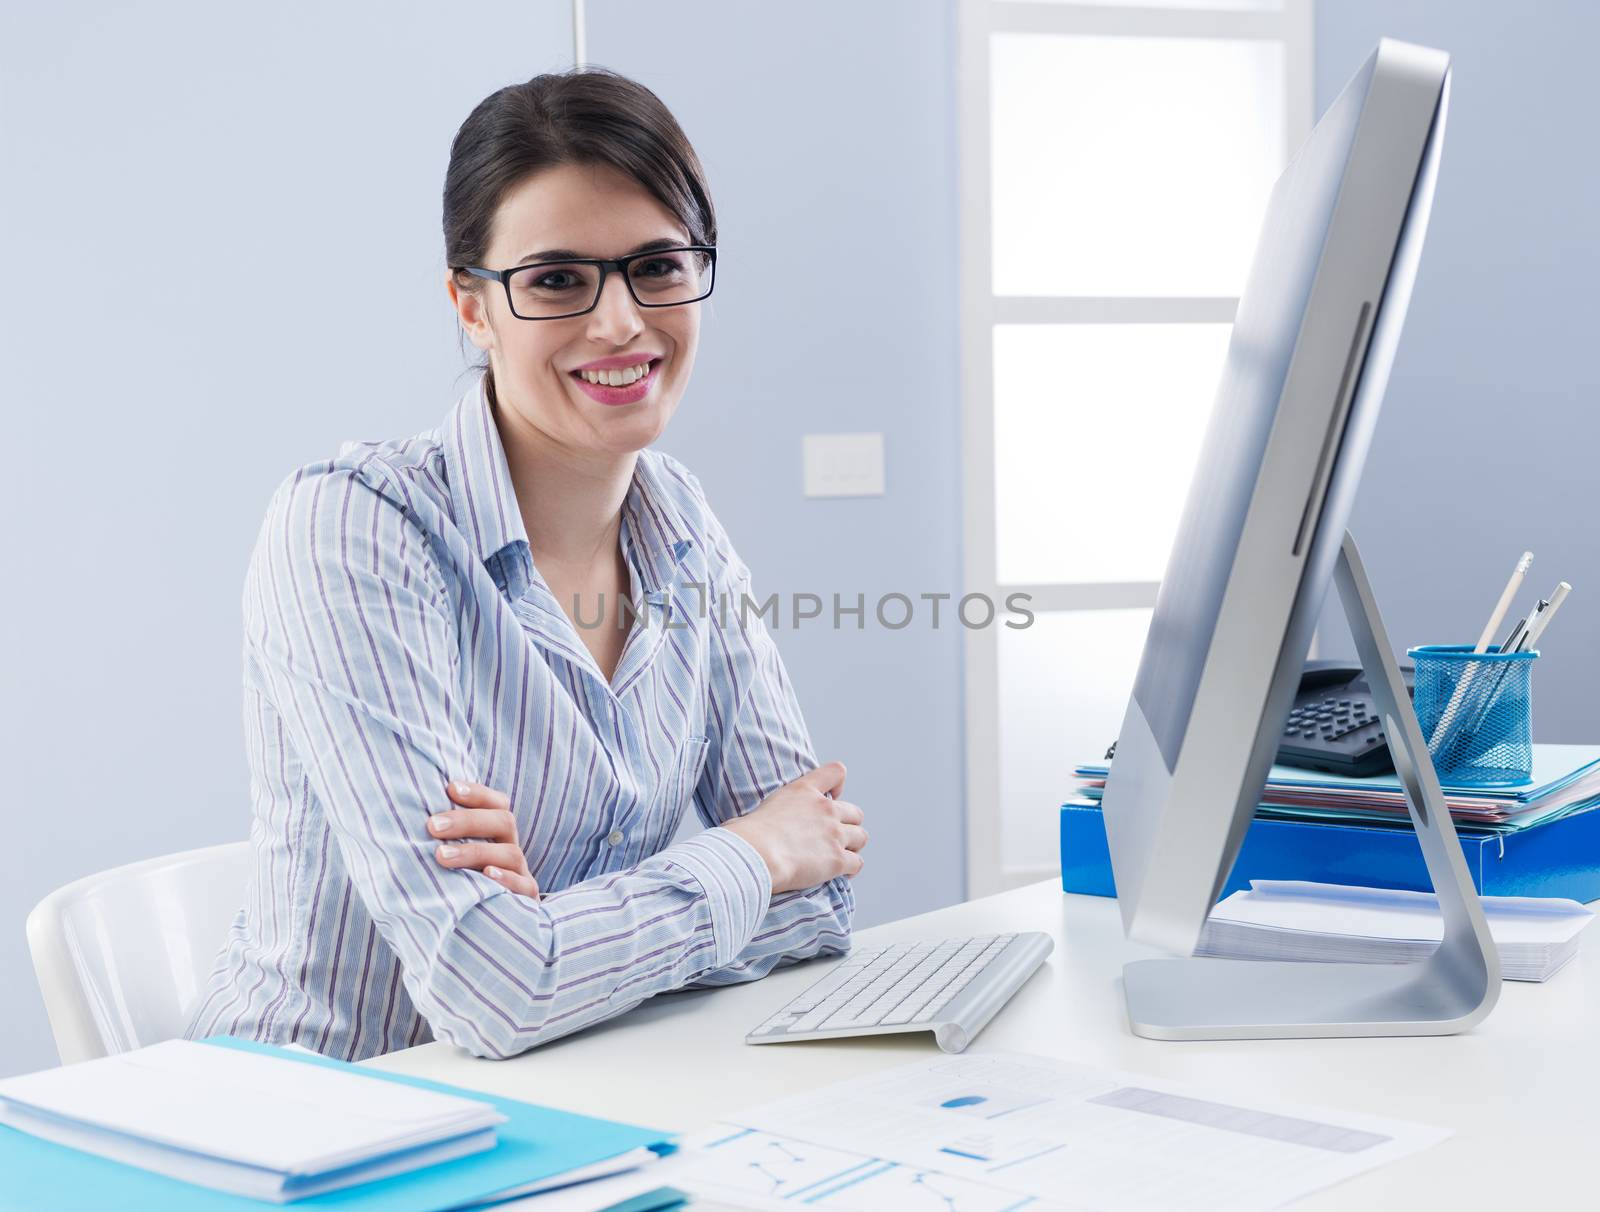 Attractive young businesswoman smiling confidently at her desk.